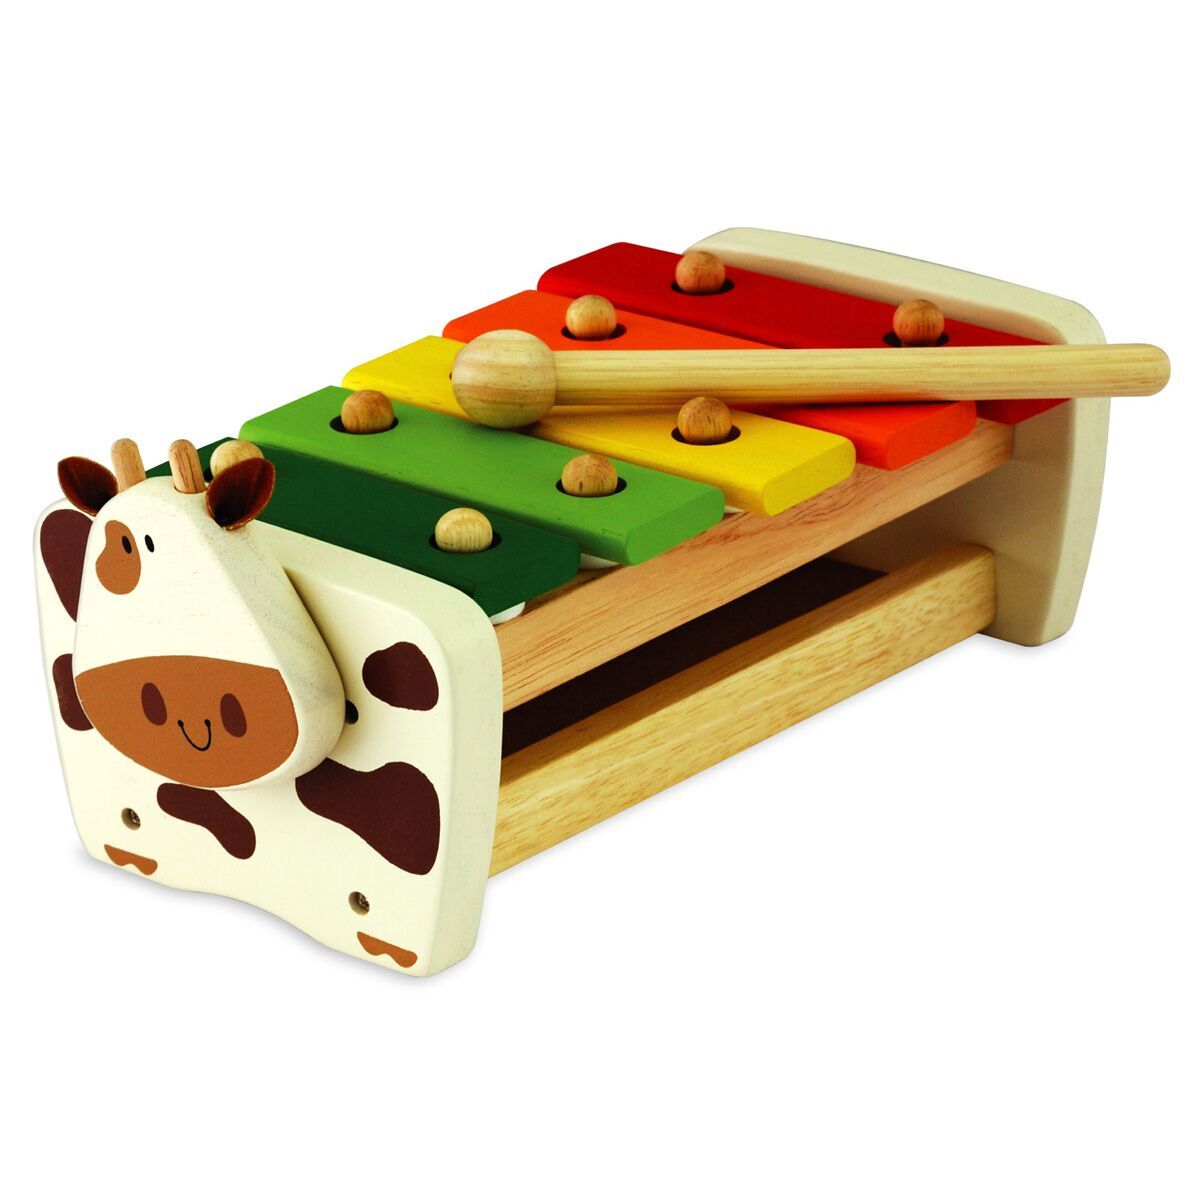 Cow Xylophone Bench - I'm Toy